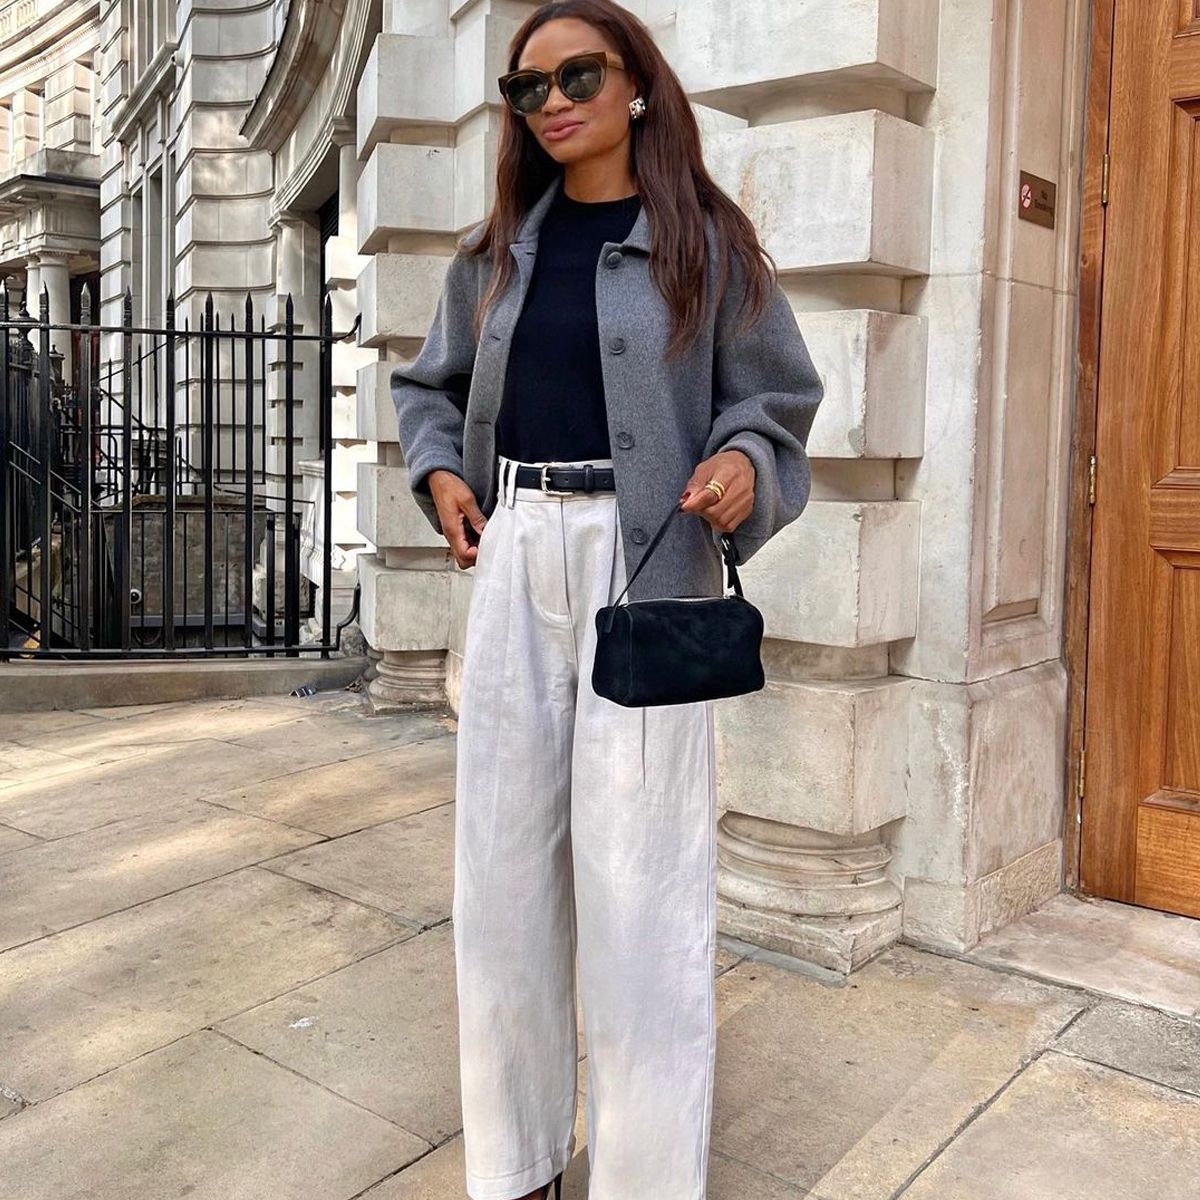 Shop 7 Black-and-White Outfits Inspired by Stockholm Street Style